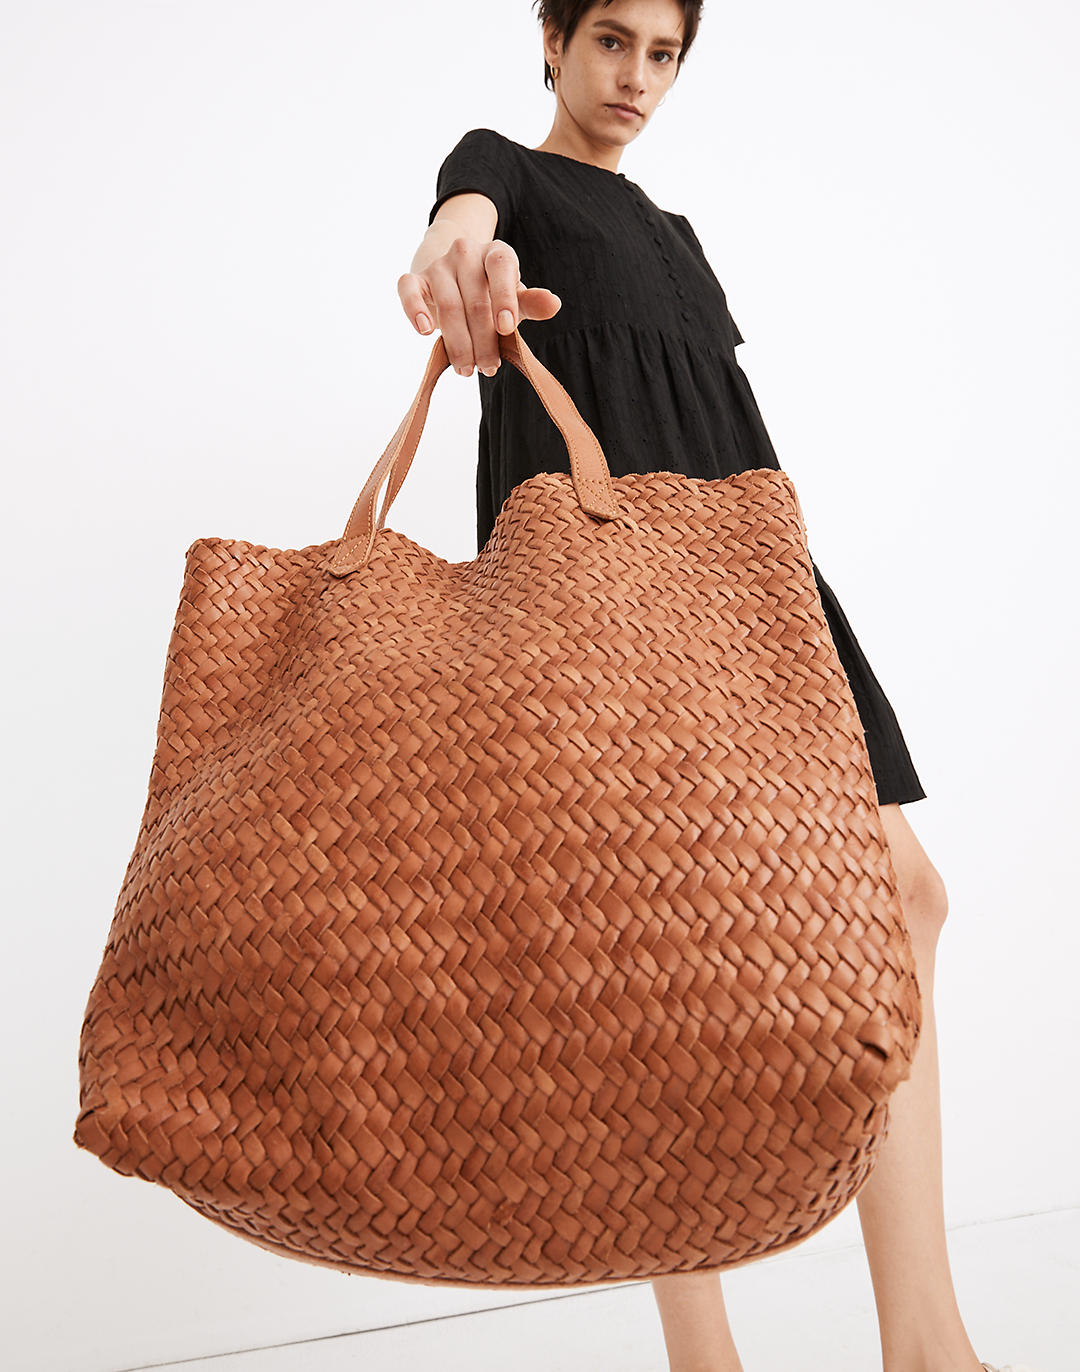 Black woven tote bag real leather for women